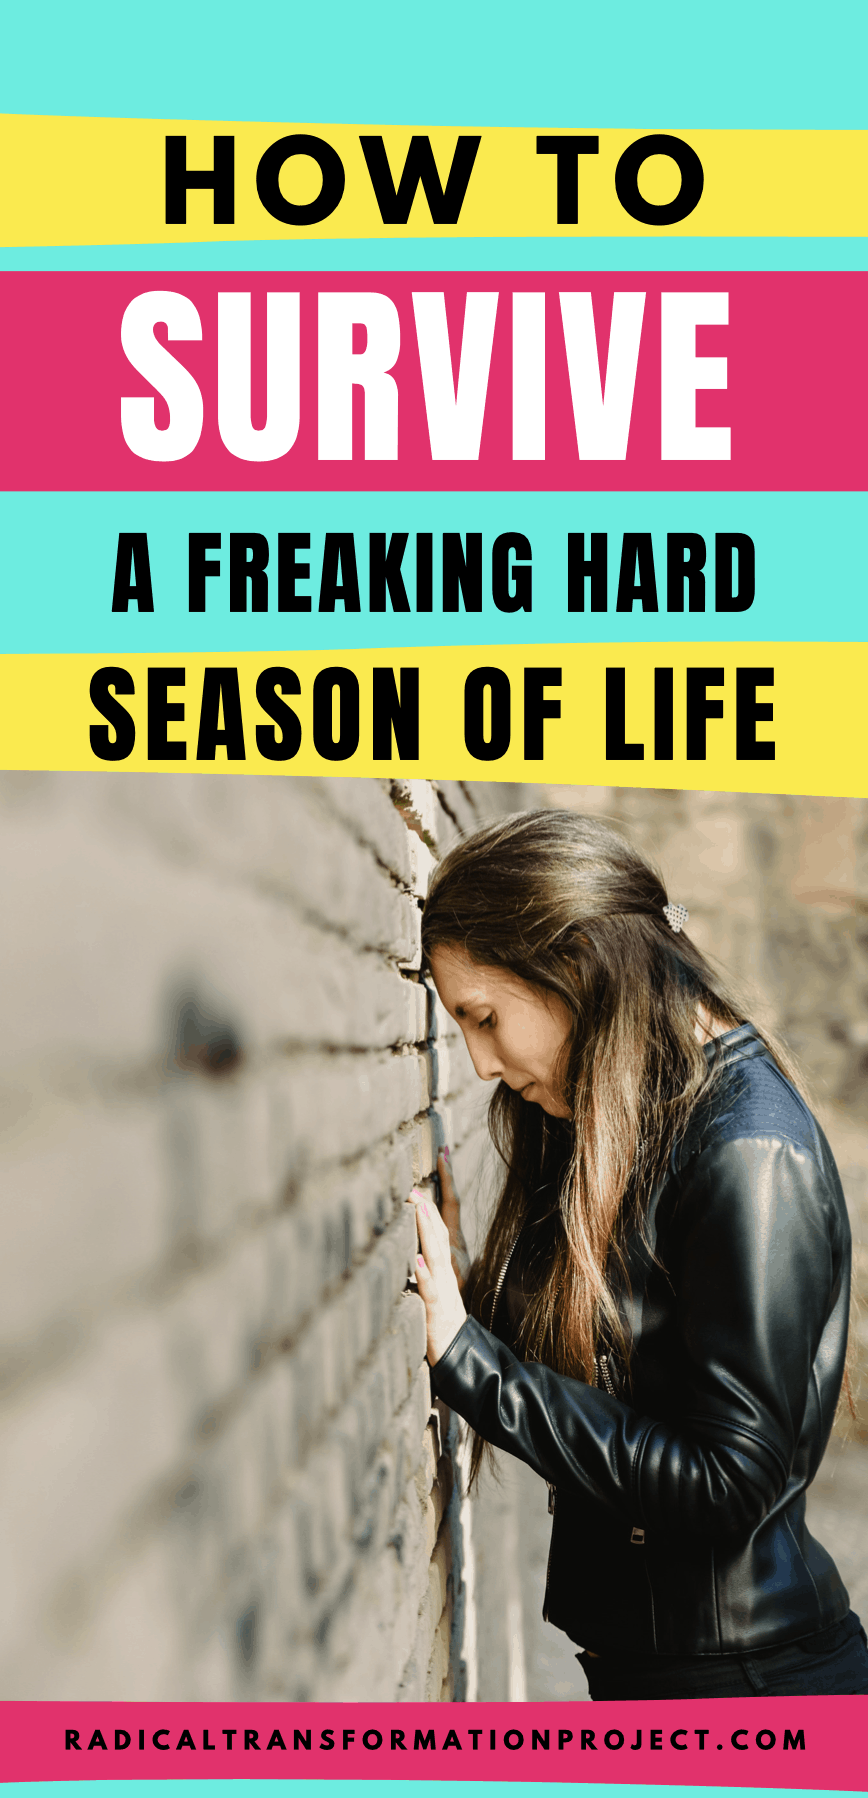 How To Survive A Freaking Hard Season of Life